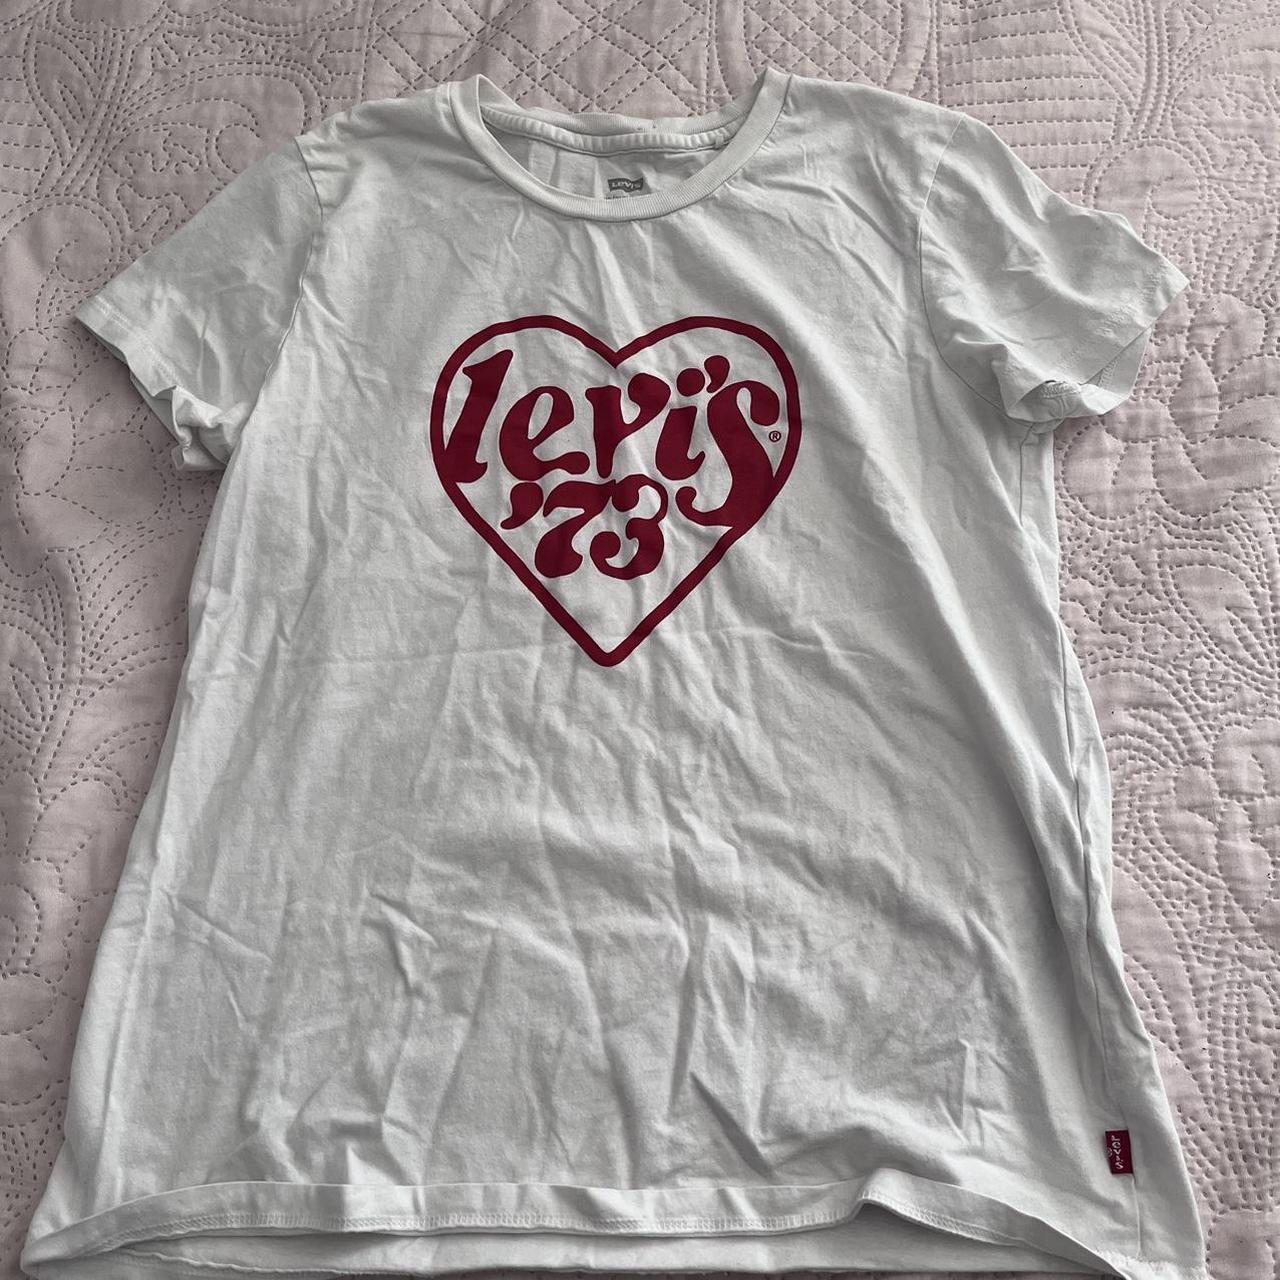 Levi's Women's White and Red T-shirt | Depop